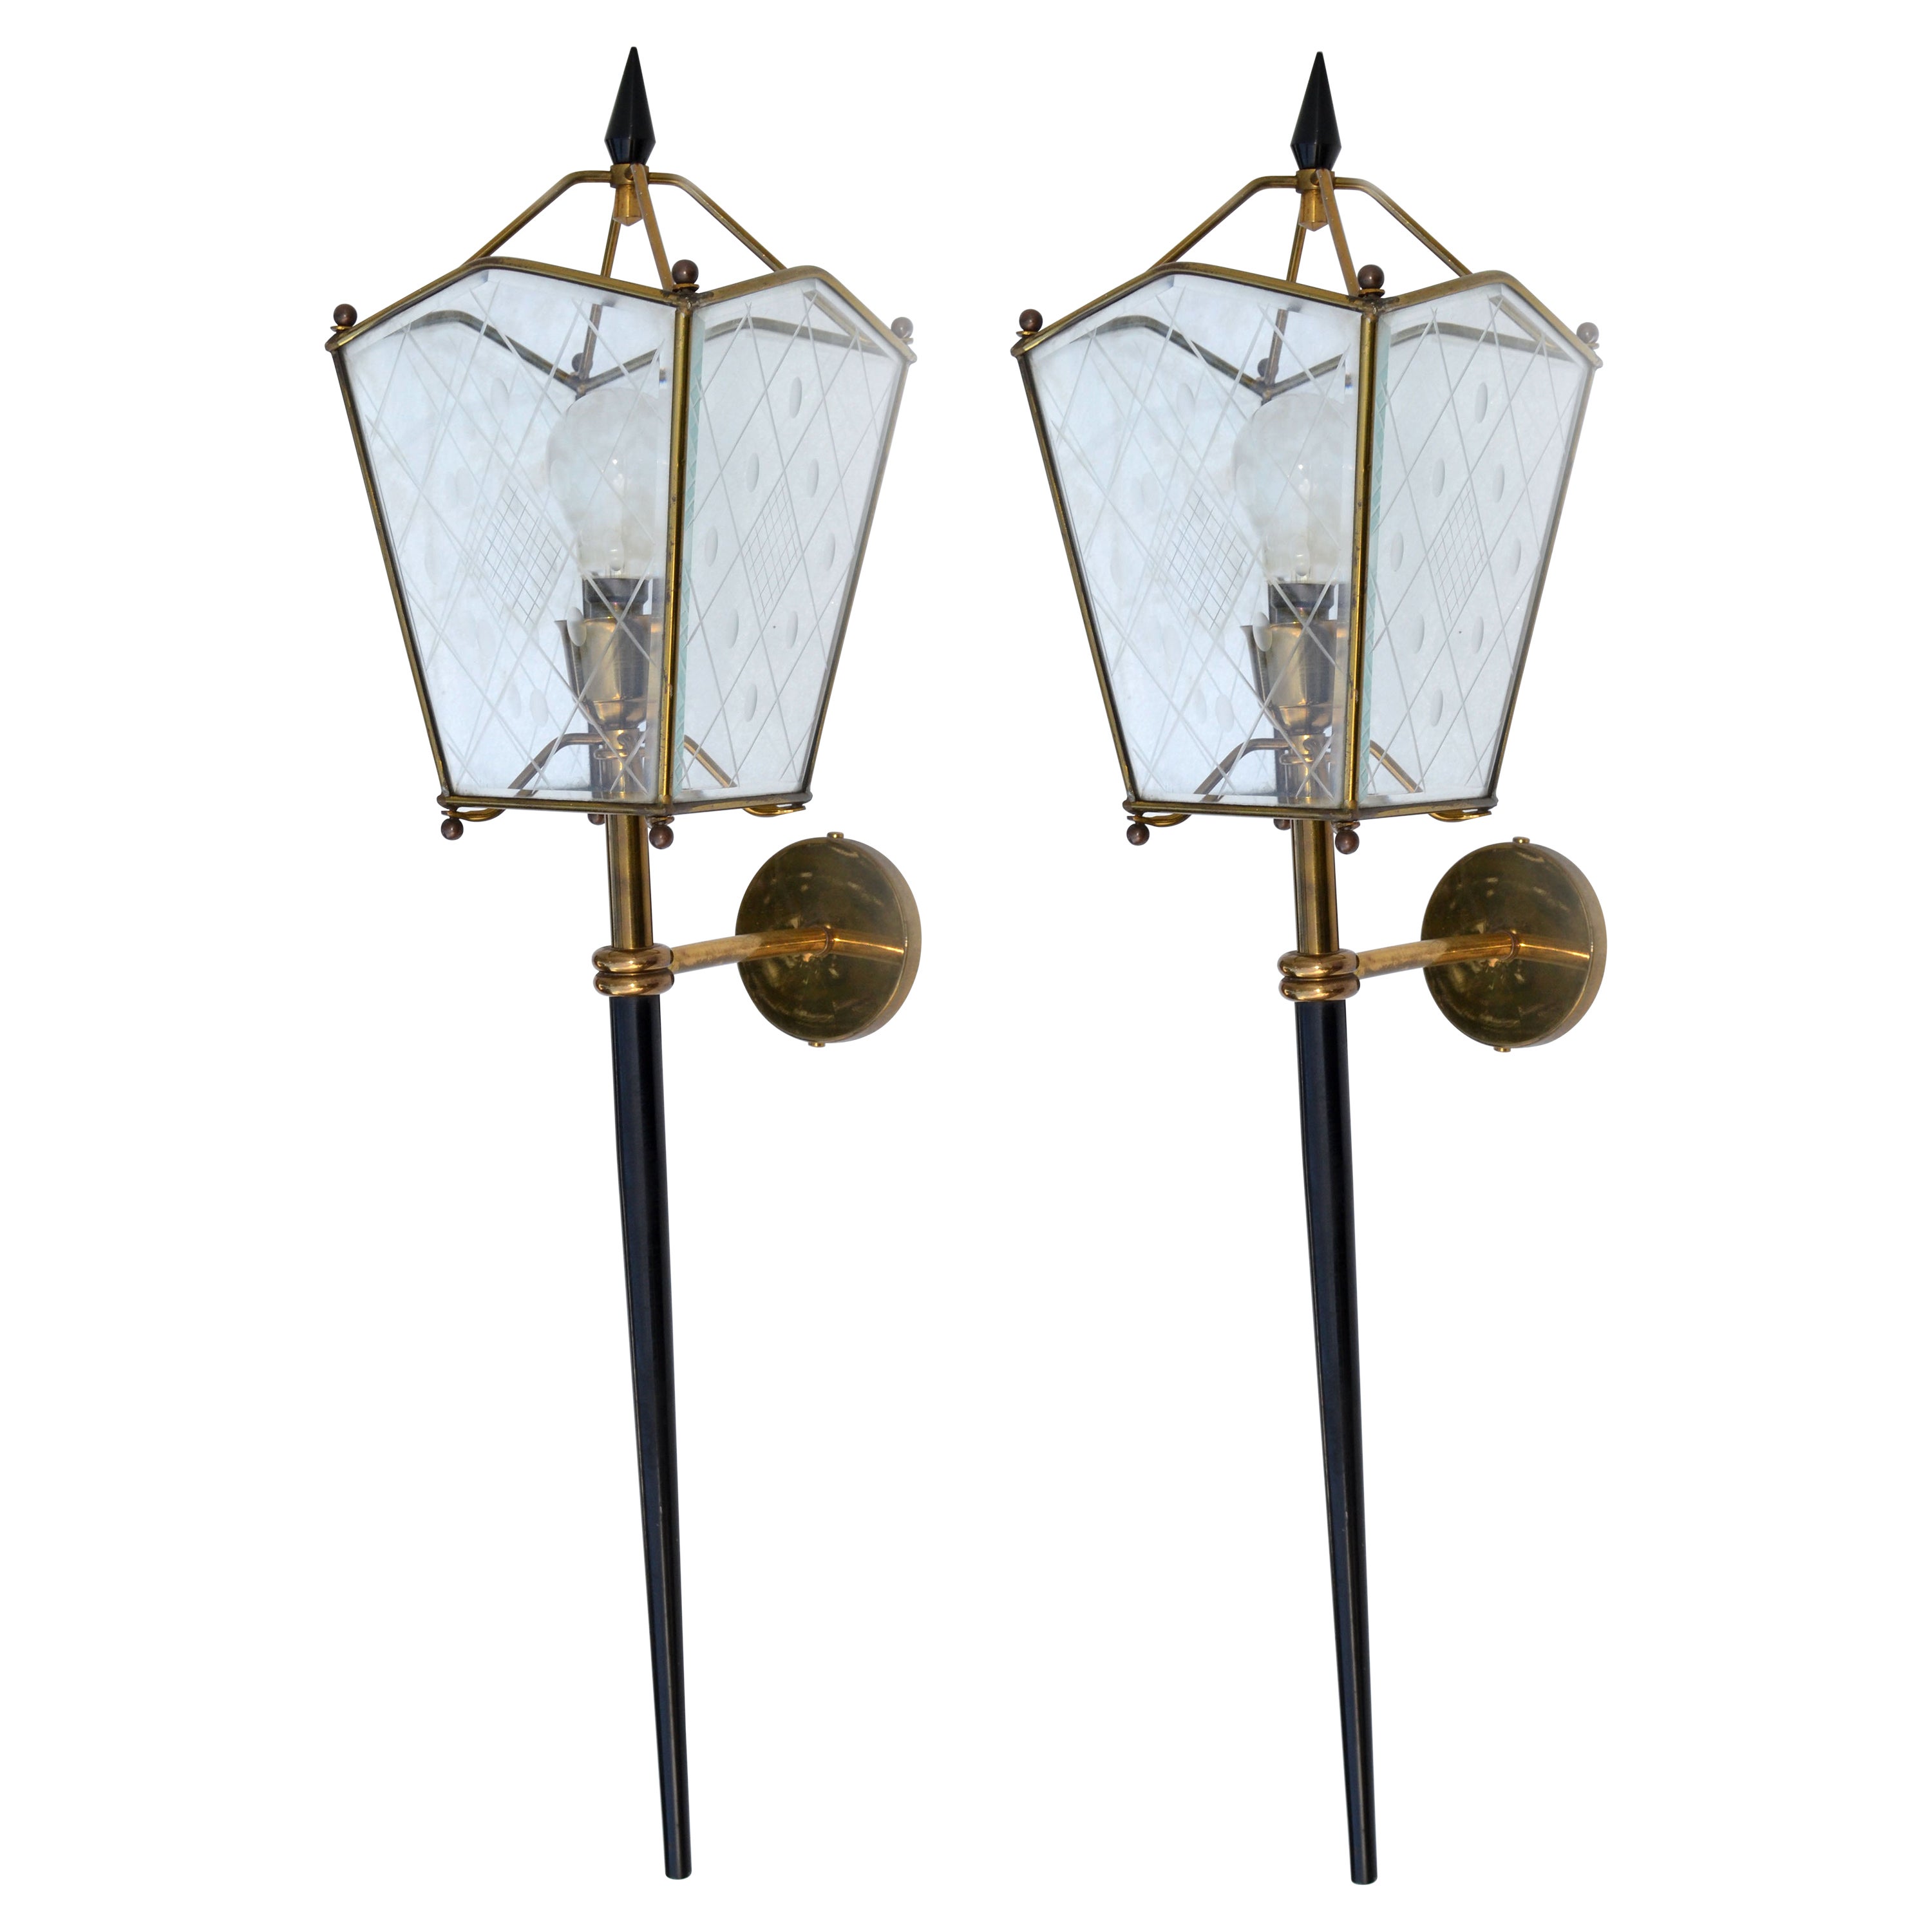 Jacques Adnet Style Largest Size Sconces Lantern Wall Lamps France 1960, Pair